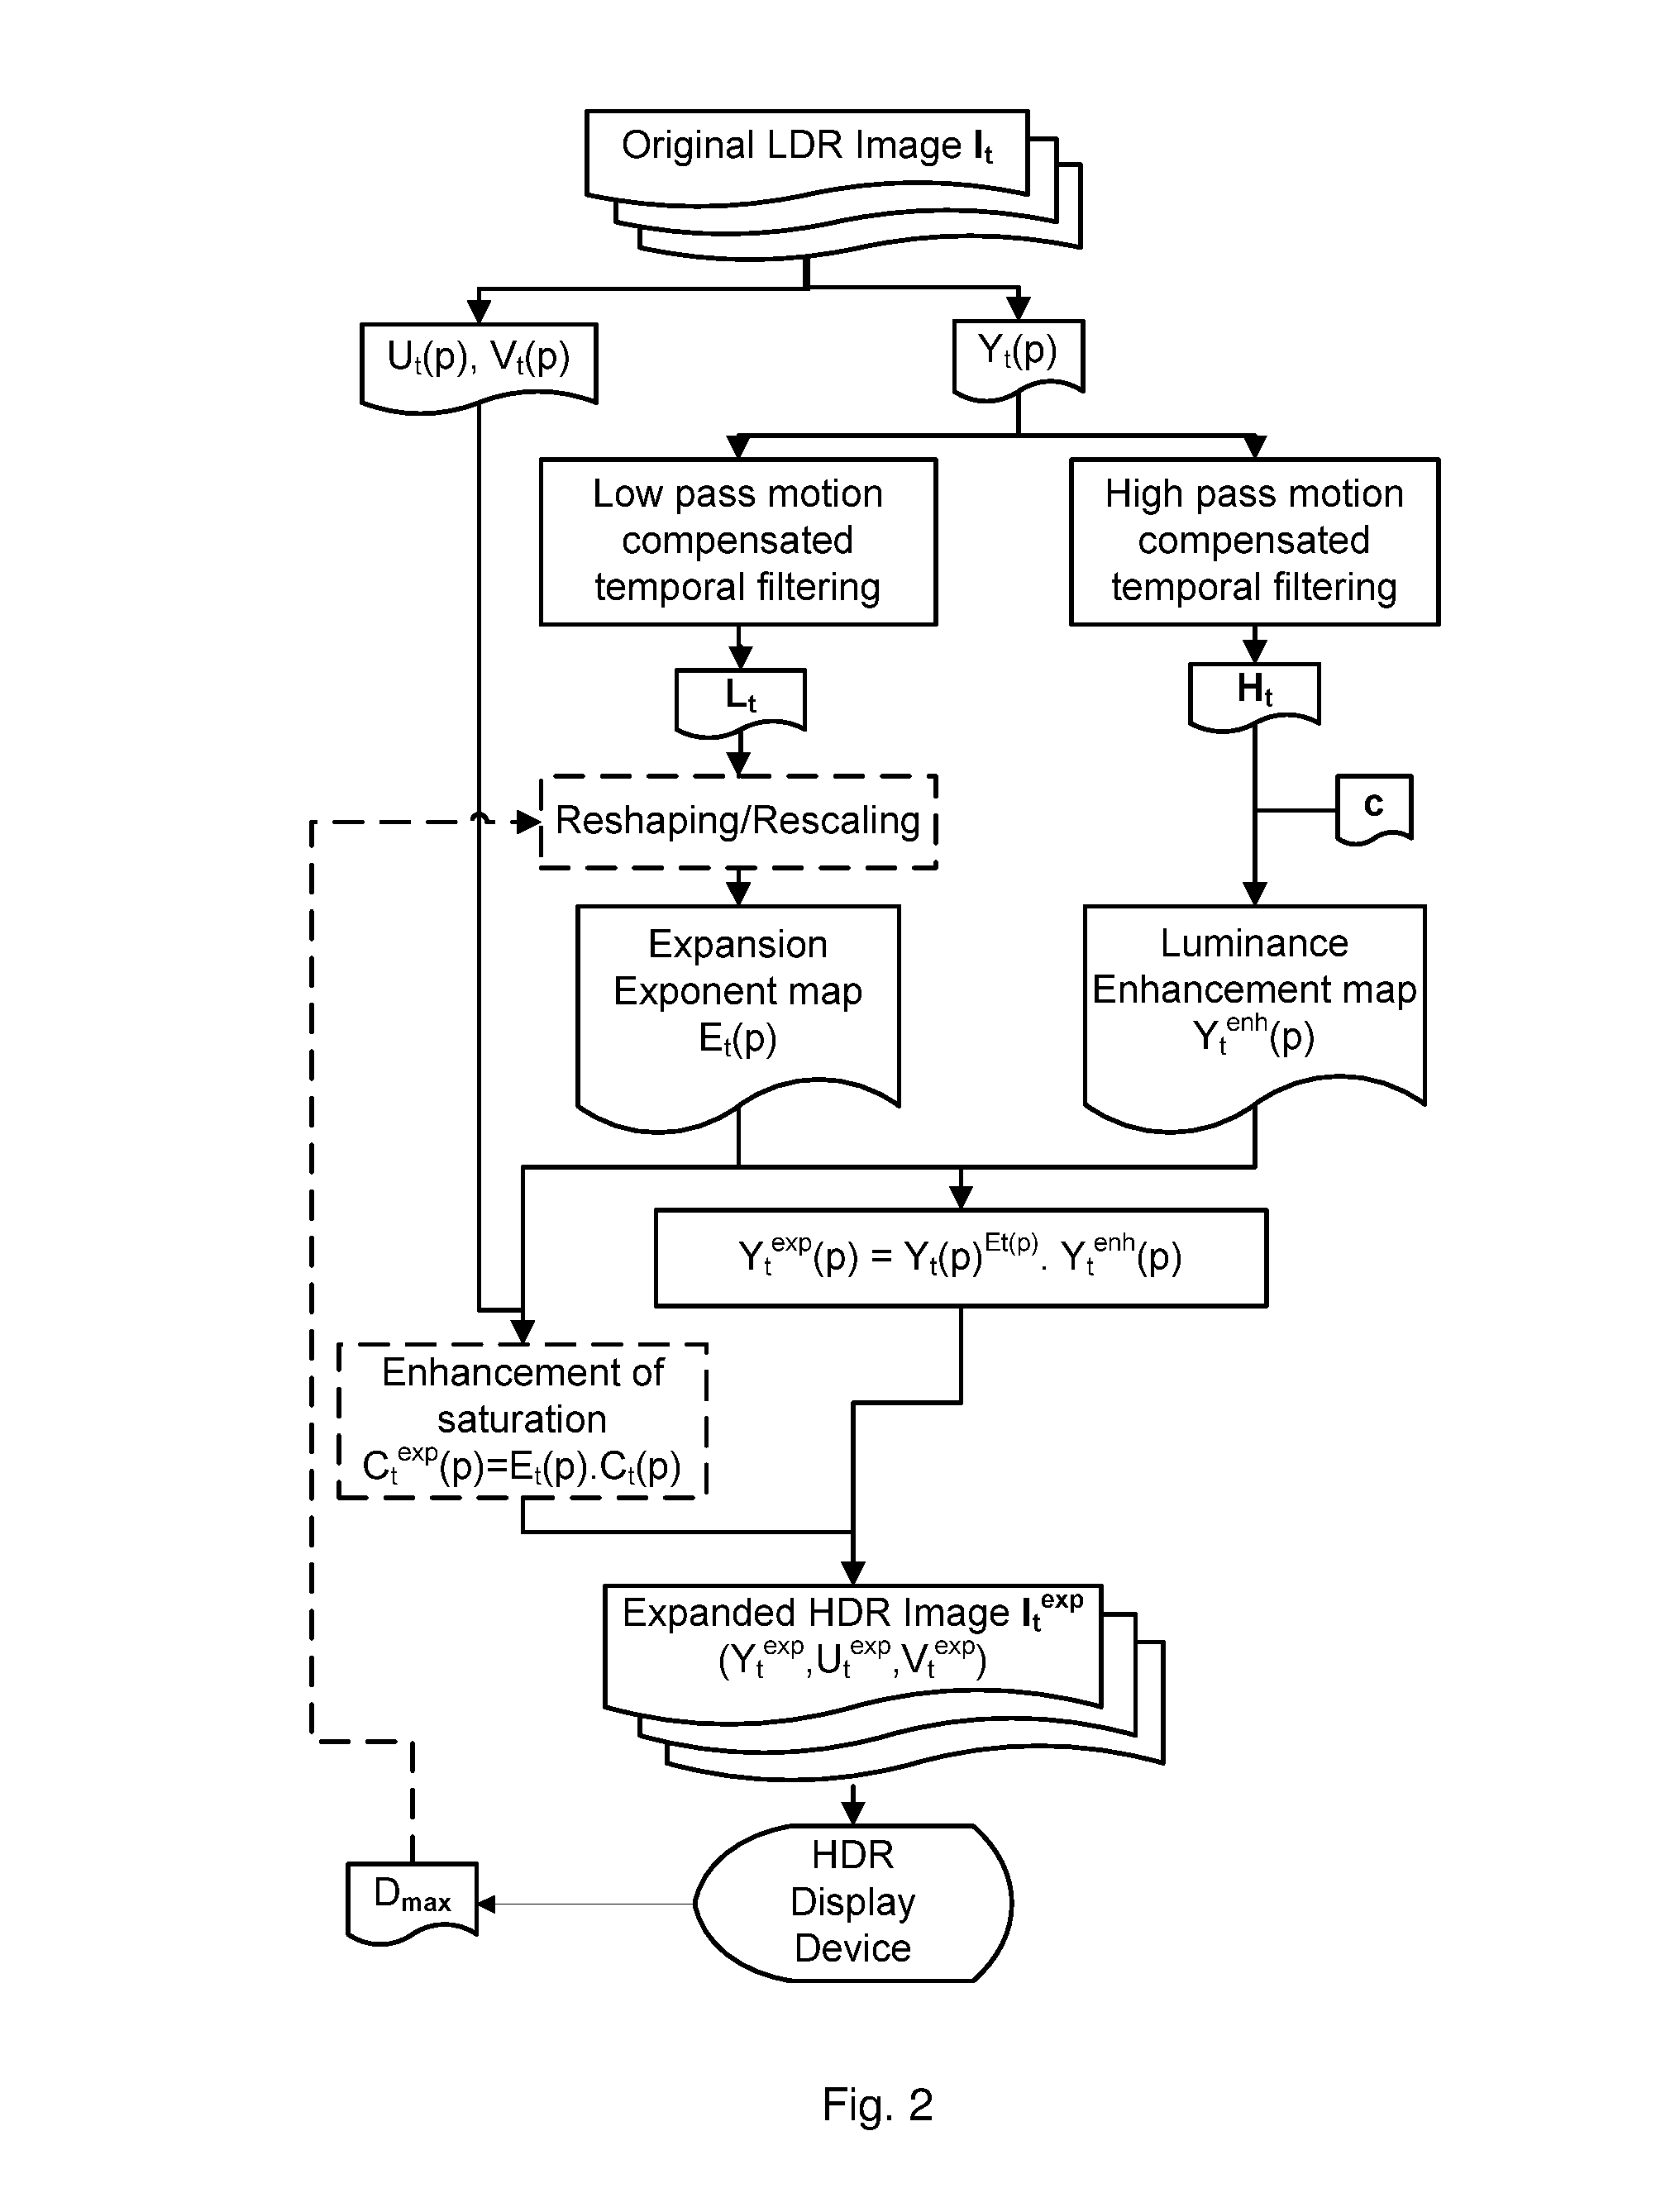 Method for inverse tone mapping of a sequence of images